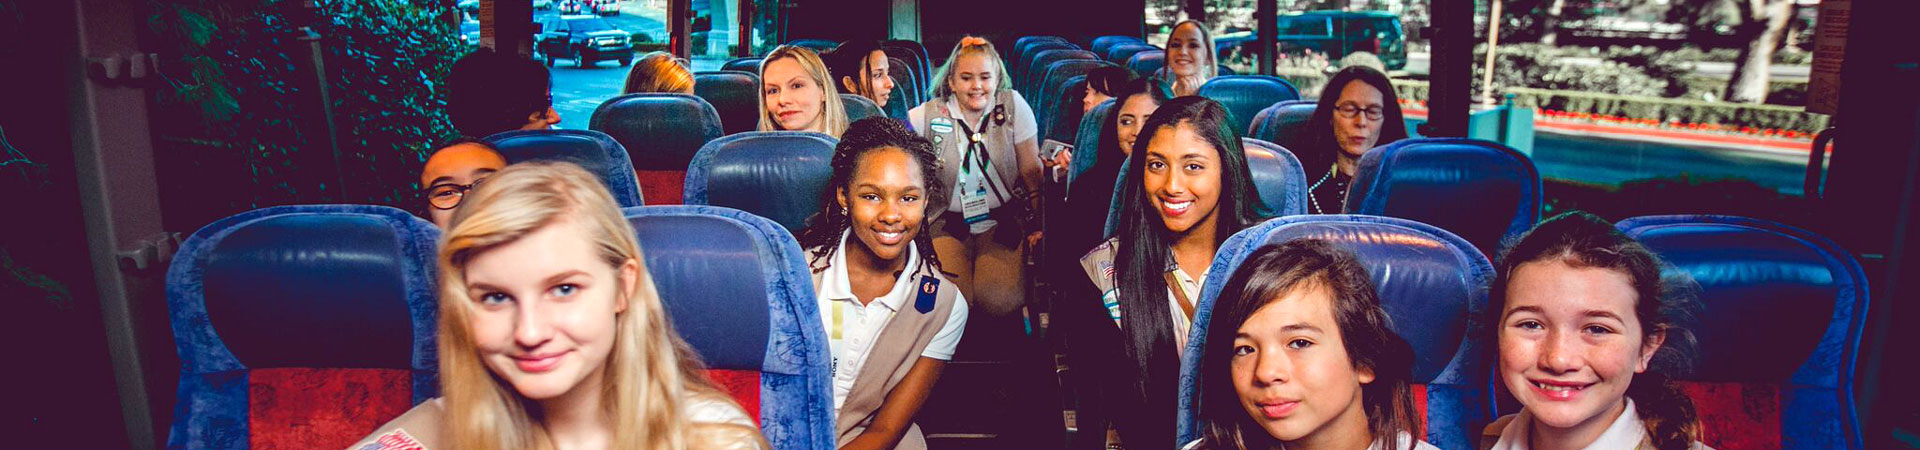  A group of Girl Scouts in Girl Scout uniforms on a bus with blue seats.  